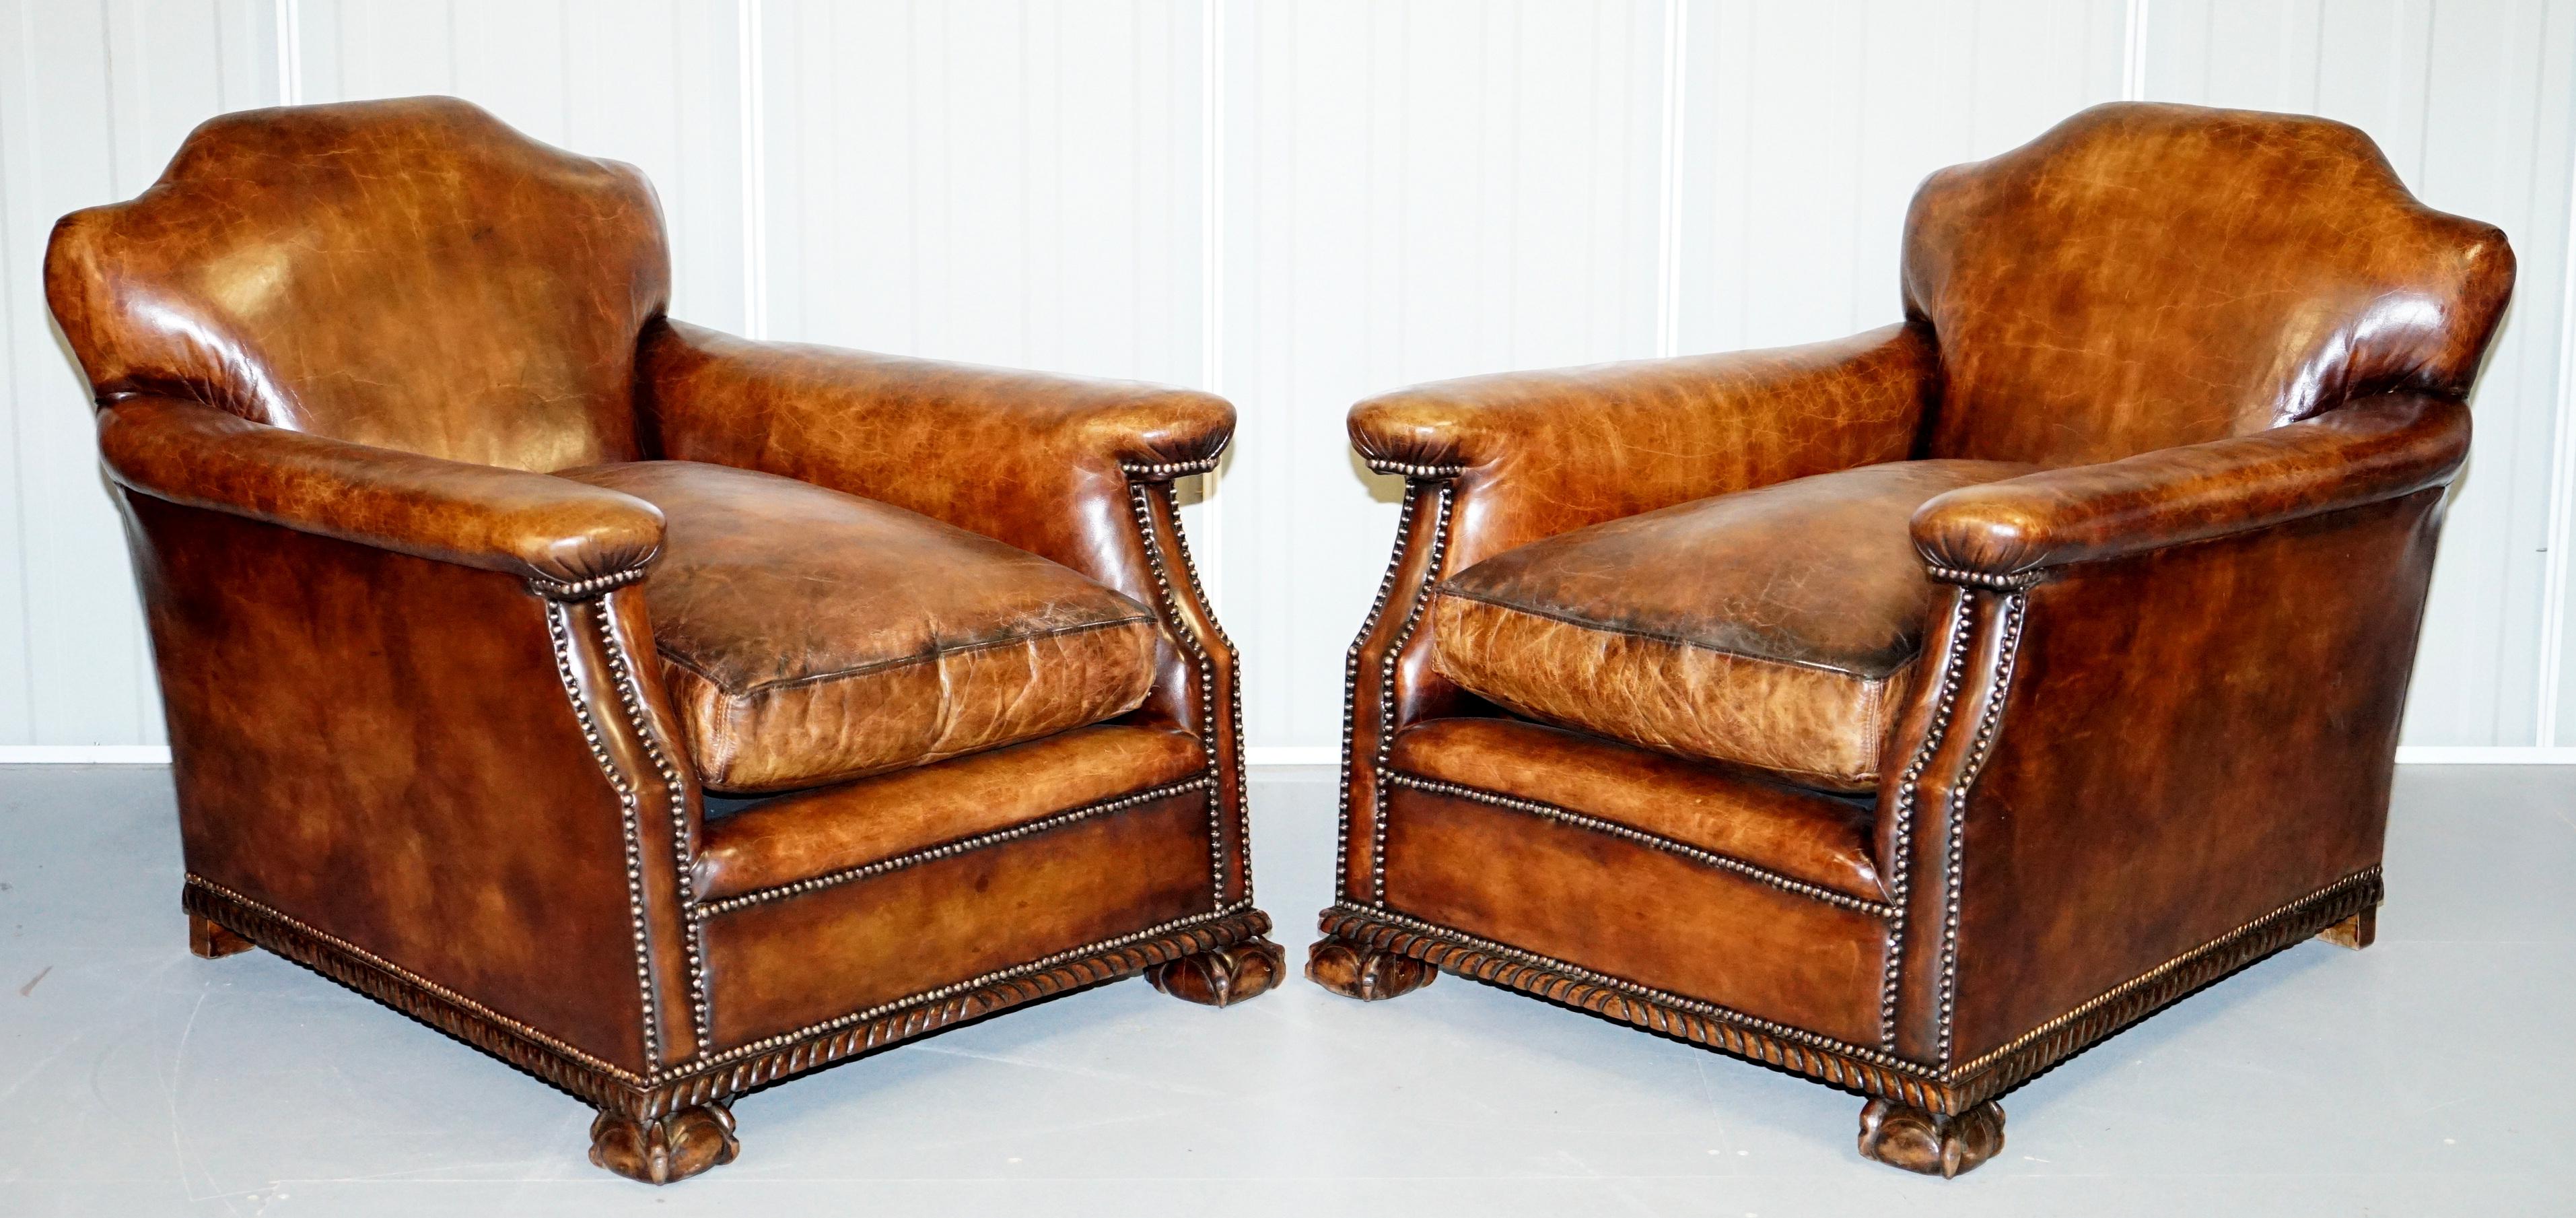 We are delighted to offer for sale this stunning pair of fully restored Cigar aged brown leather Victorian club armchairs with claw & ball feet

A very good looking and nicely refurbished pair, these are original Victorian pieces, they have